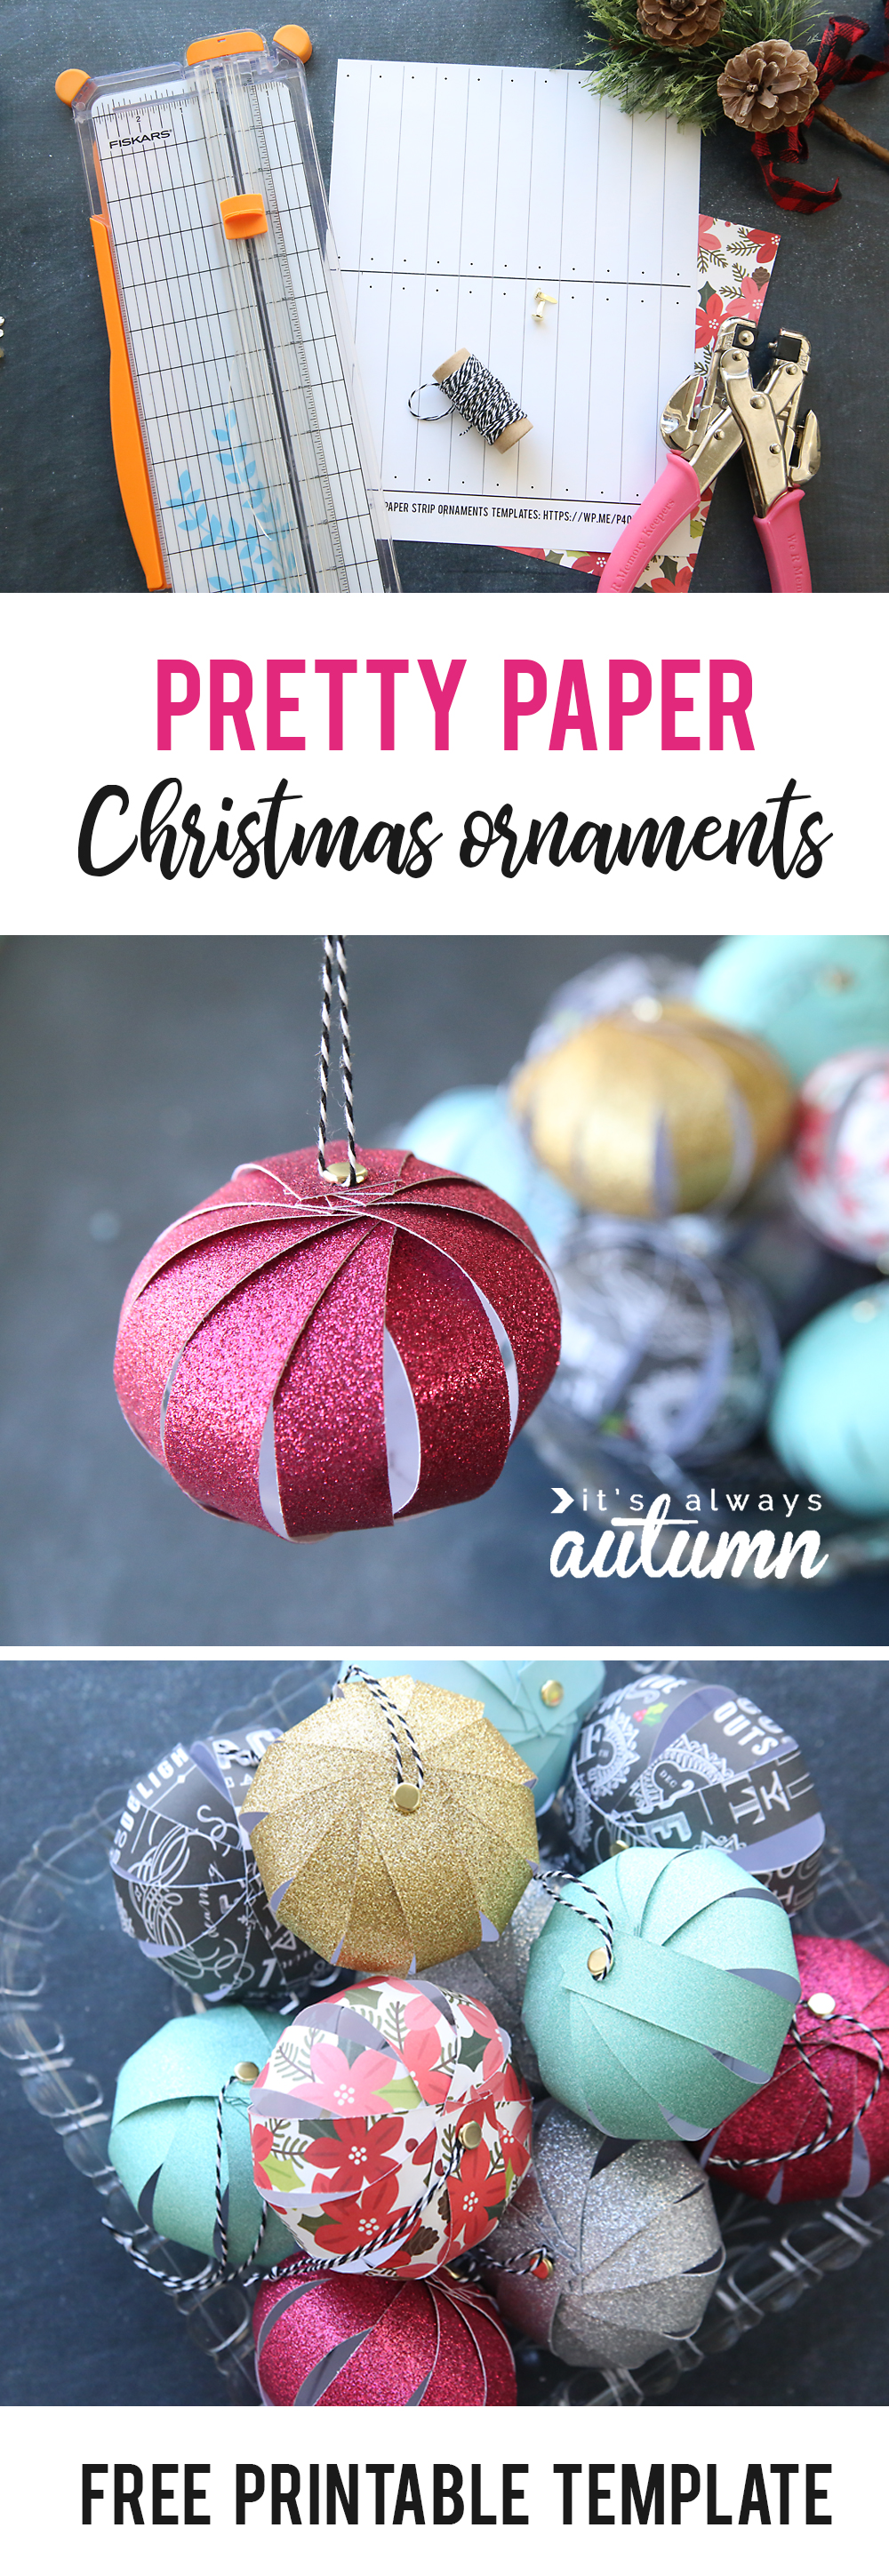 Christmas ornaments made from sparkly paper strips, printable template